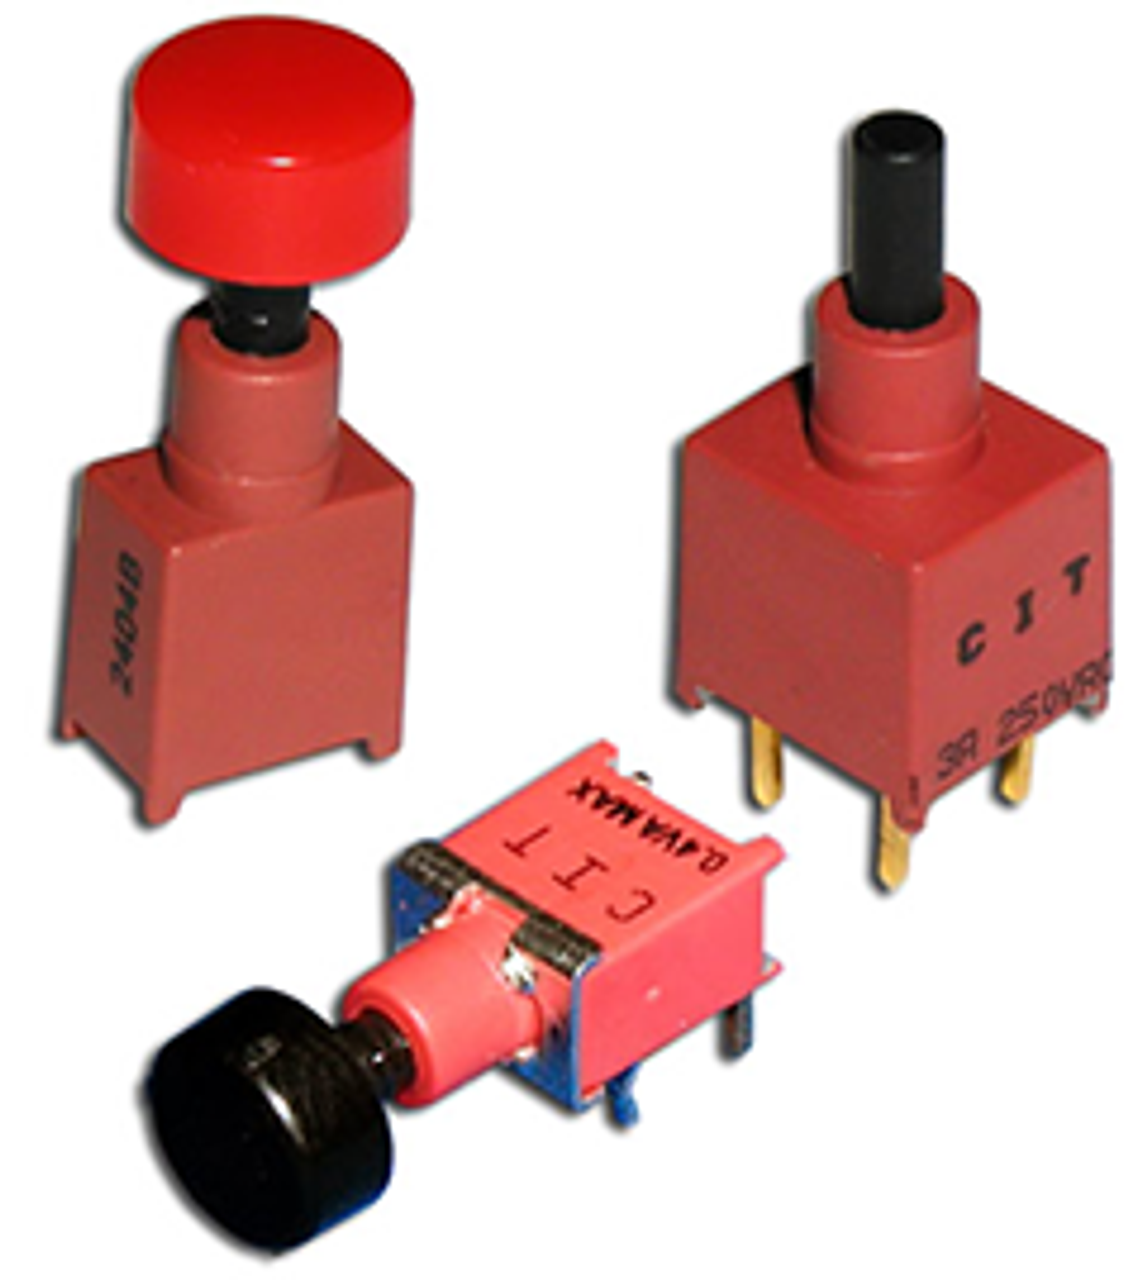 CIT Relay and Switch BSP20FHGC851 Pushbutton Switches